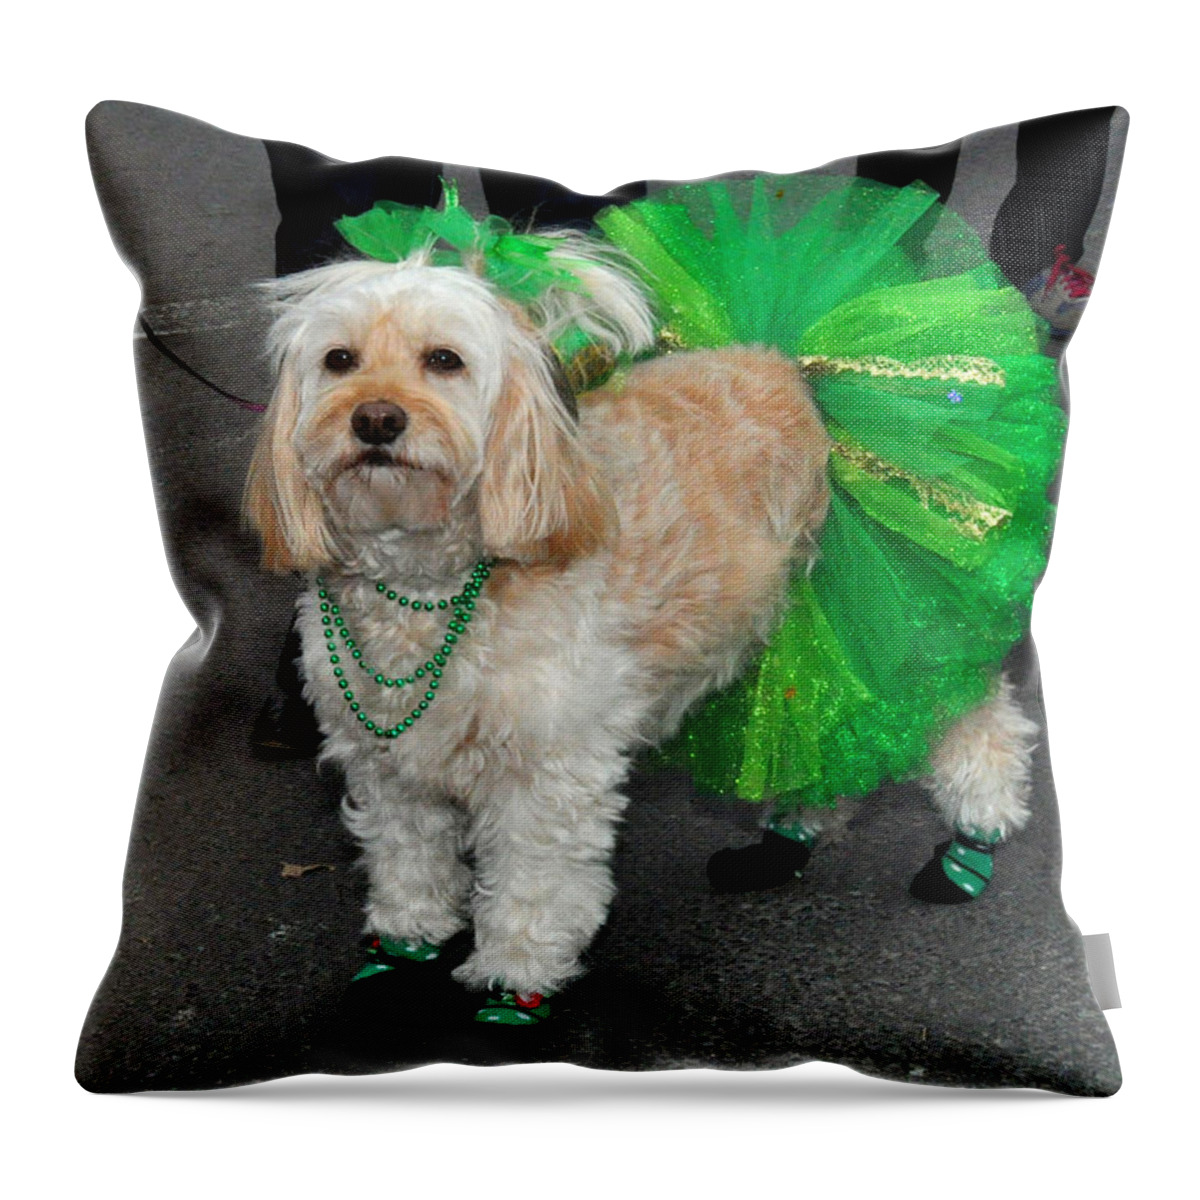 Dog Throw Pillow featuring the photograph Green wearing Dog for St. Patrick's Day by Diane Lent